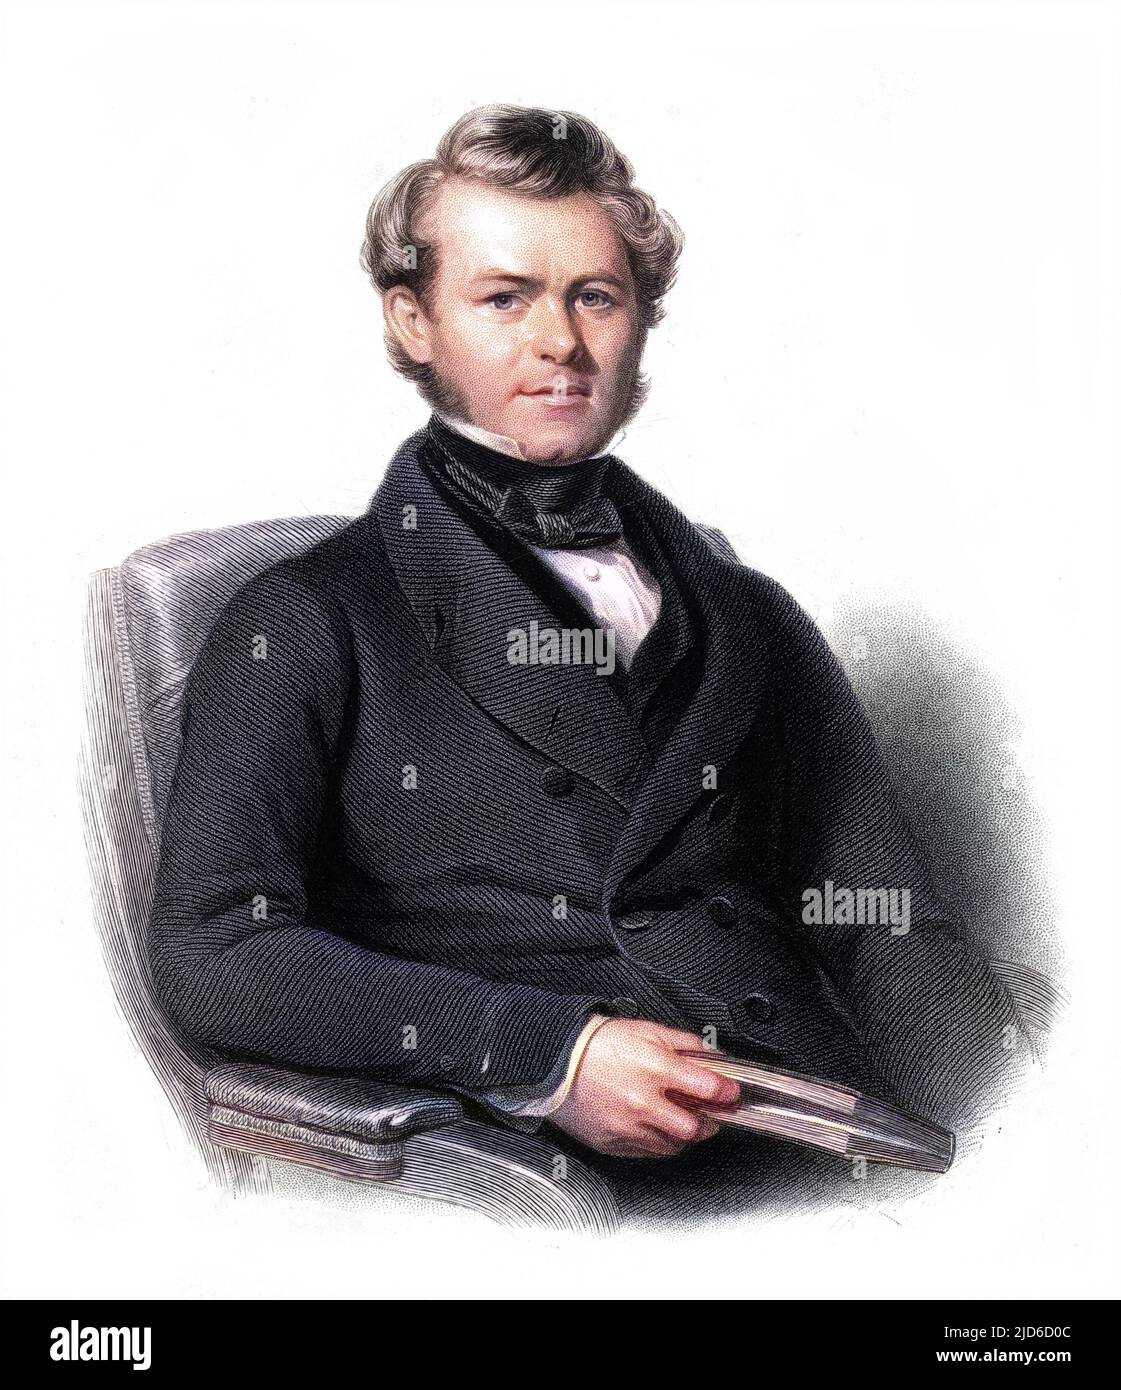 WILLIAM HICKLING PRESCOTT American historian, noted especially for his histories of the conquest of Mexico and Peru. Colourised version of : 10173074       Date: 1796 - 1859 Stock Photo